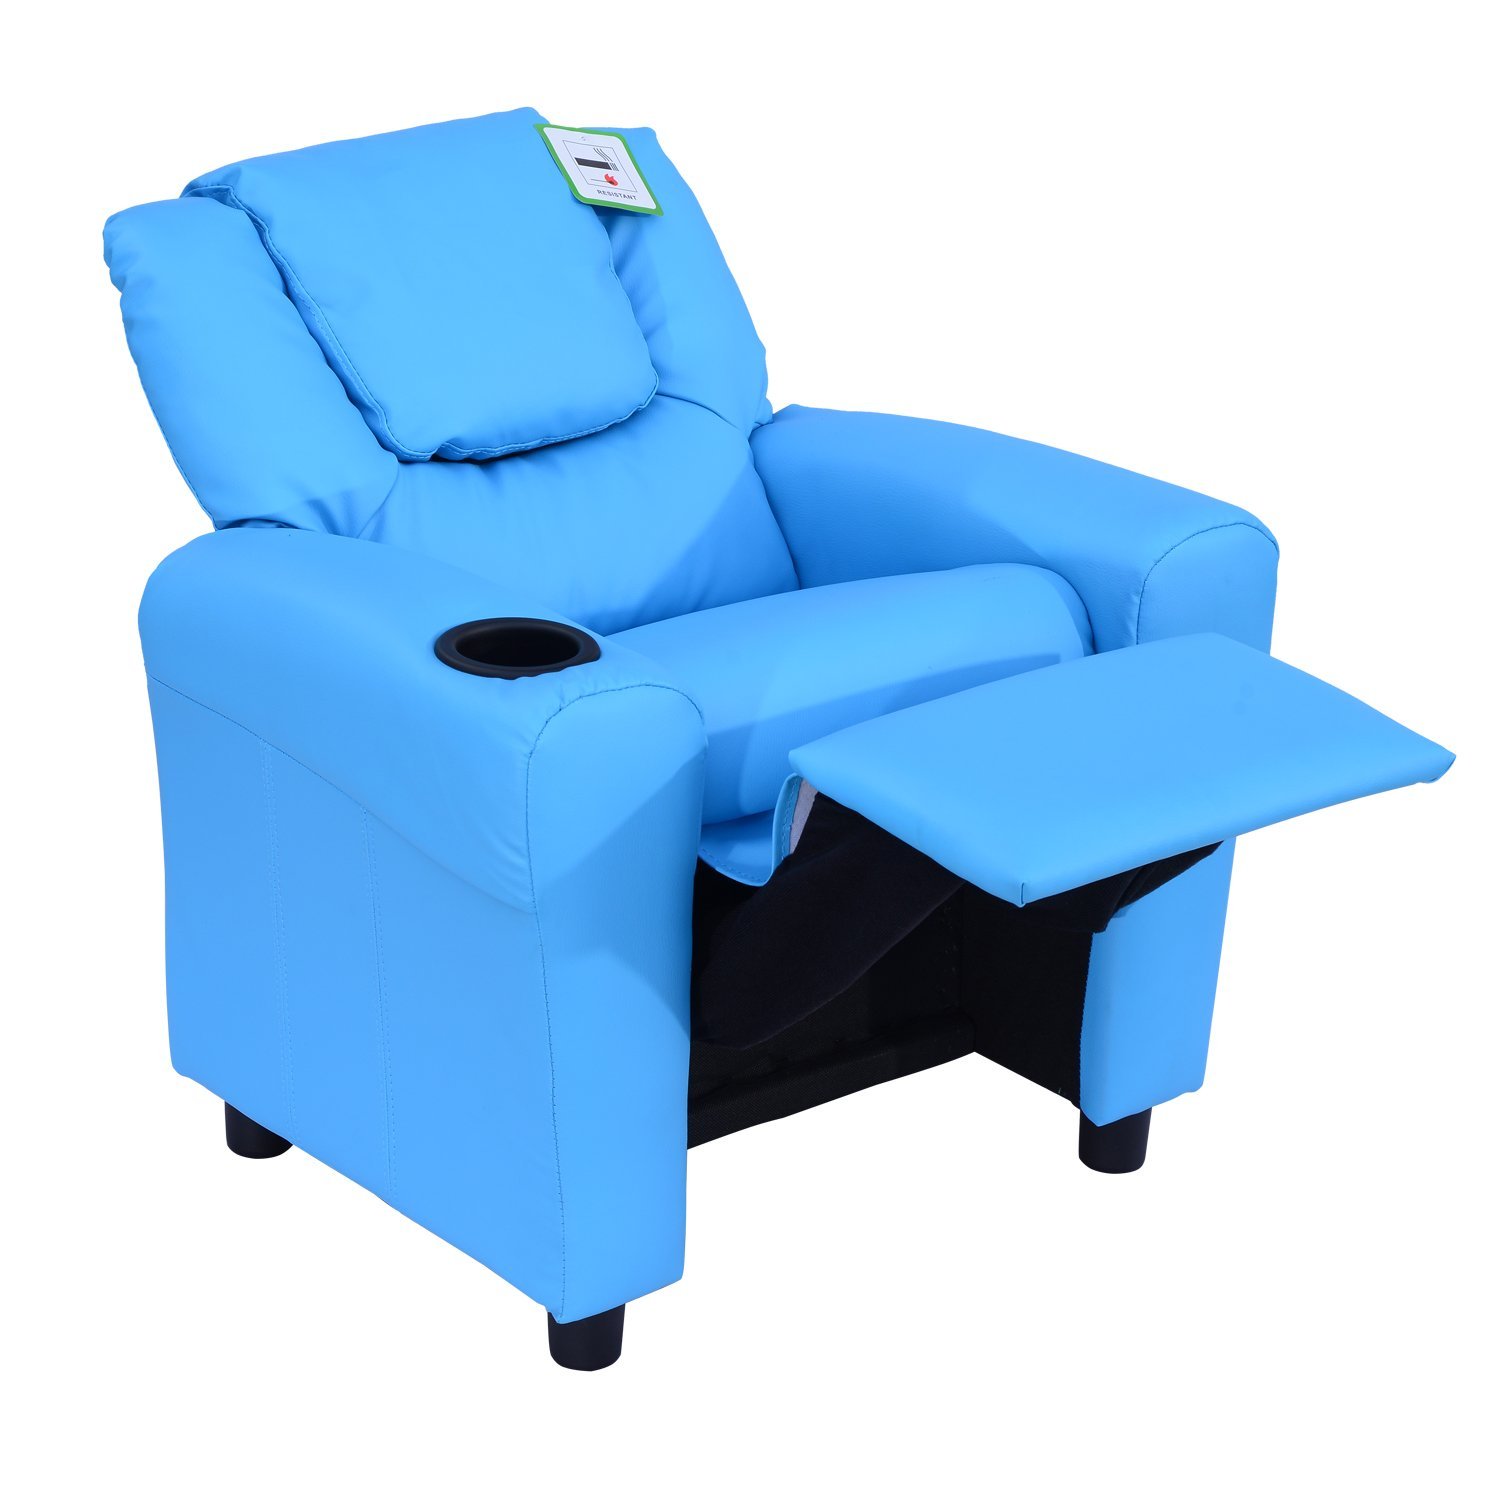 Kids Leather Armchair Home Safe Best For Children With Hom Sofa Lying  Recliner Reclining Toddler And Footstool Blue Chair Design Company Without  Arms